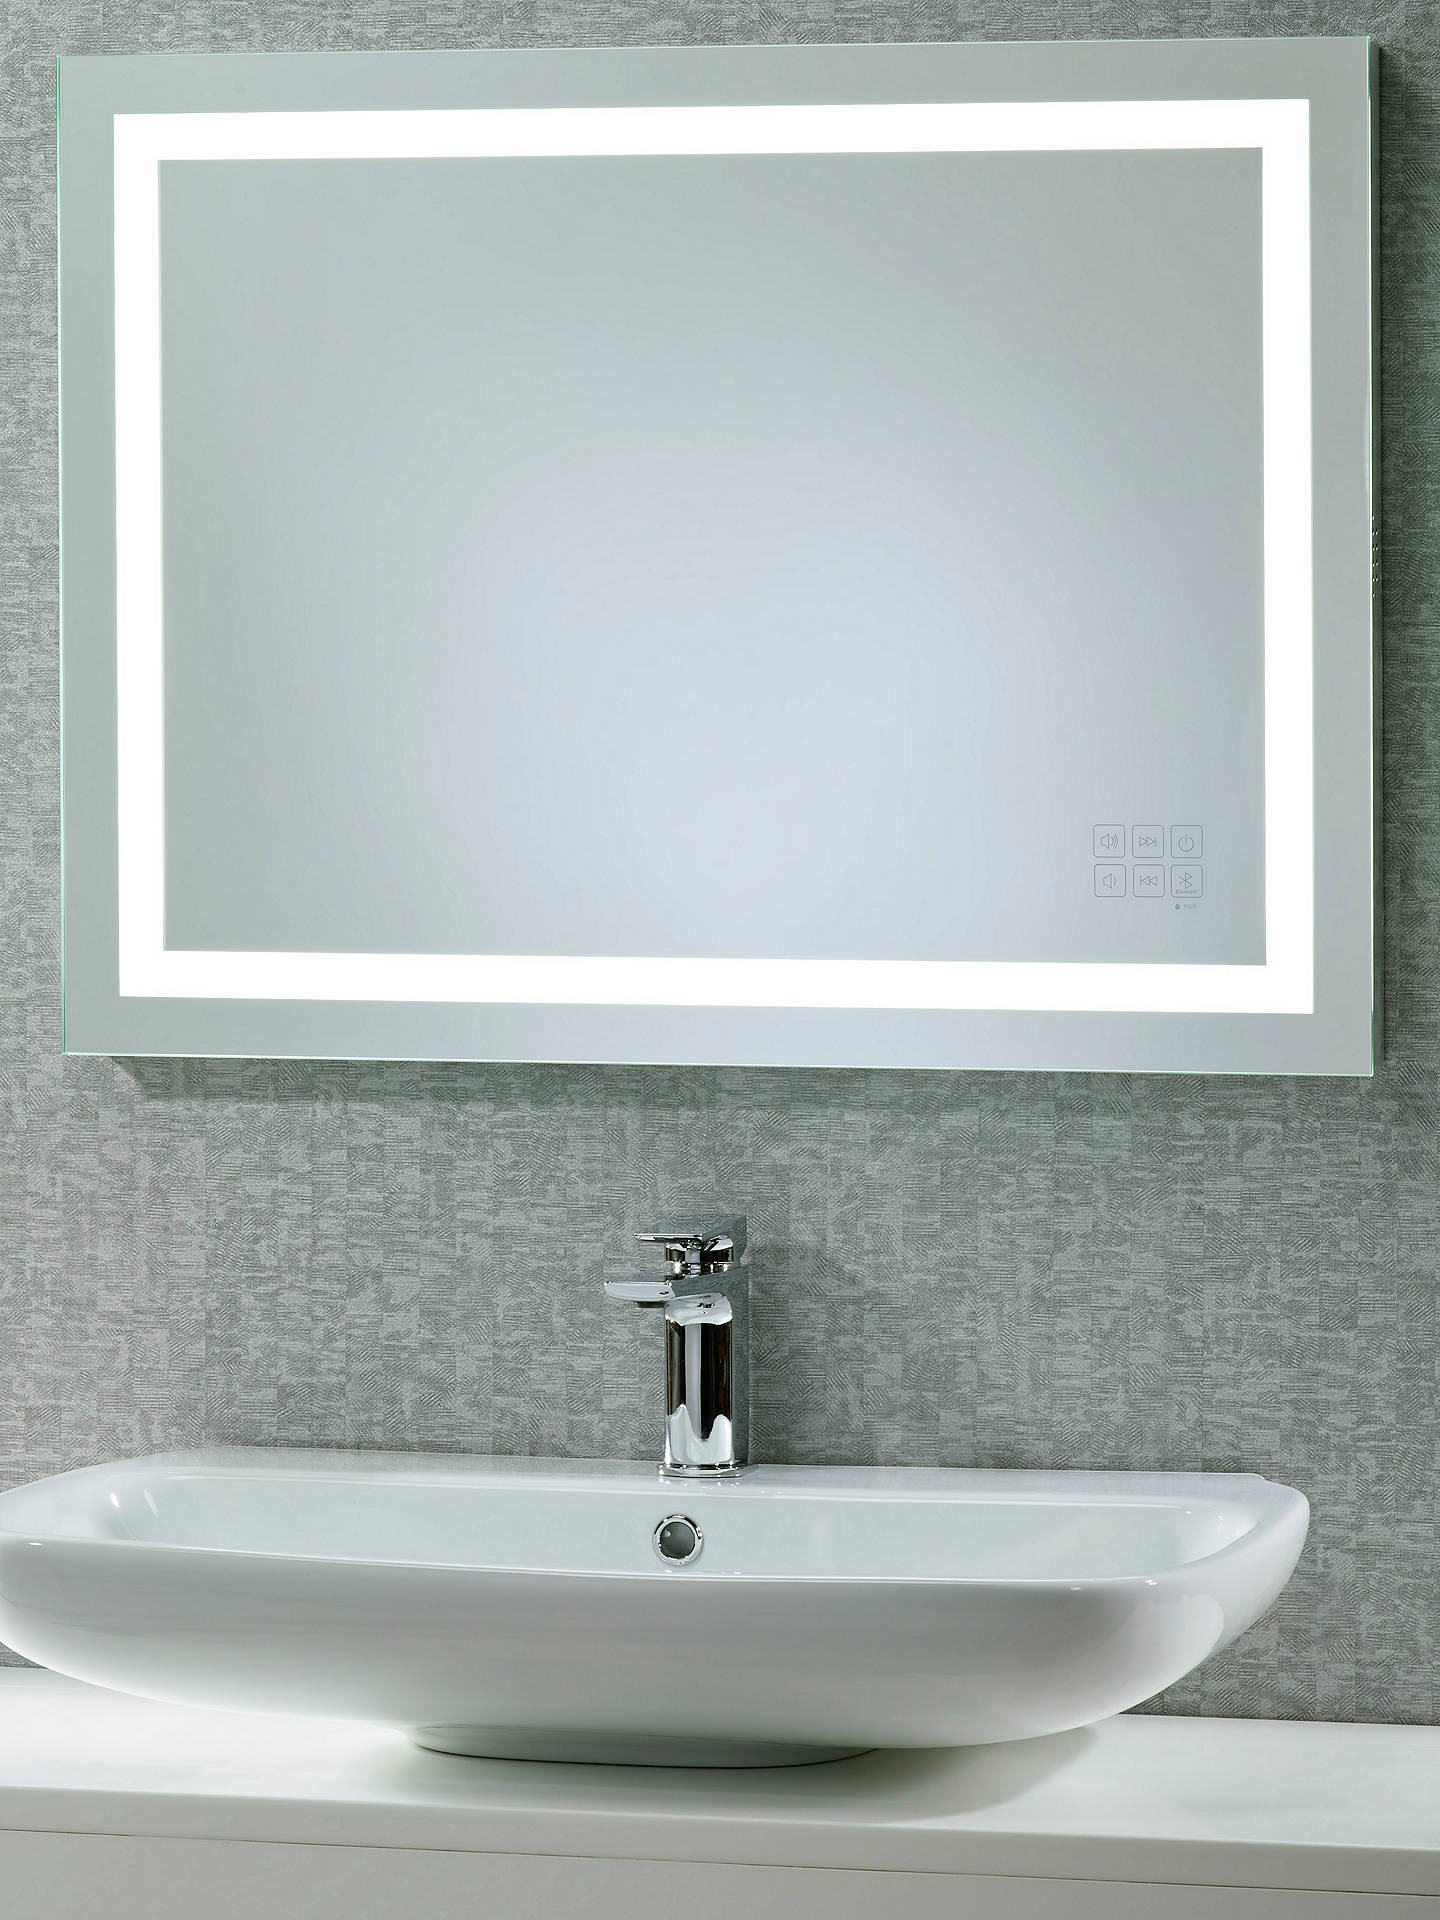 Lighted Mirrors For Bathroom
 Roper Rhodes Beat Illuminated Led Bathroom Mirror with